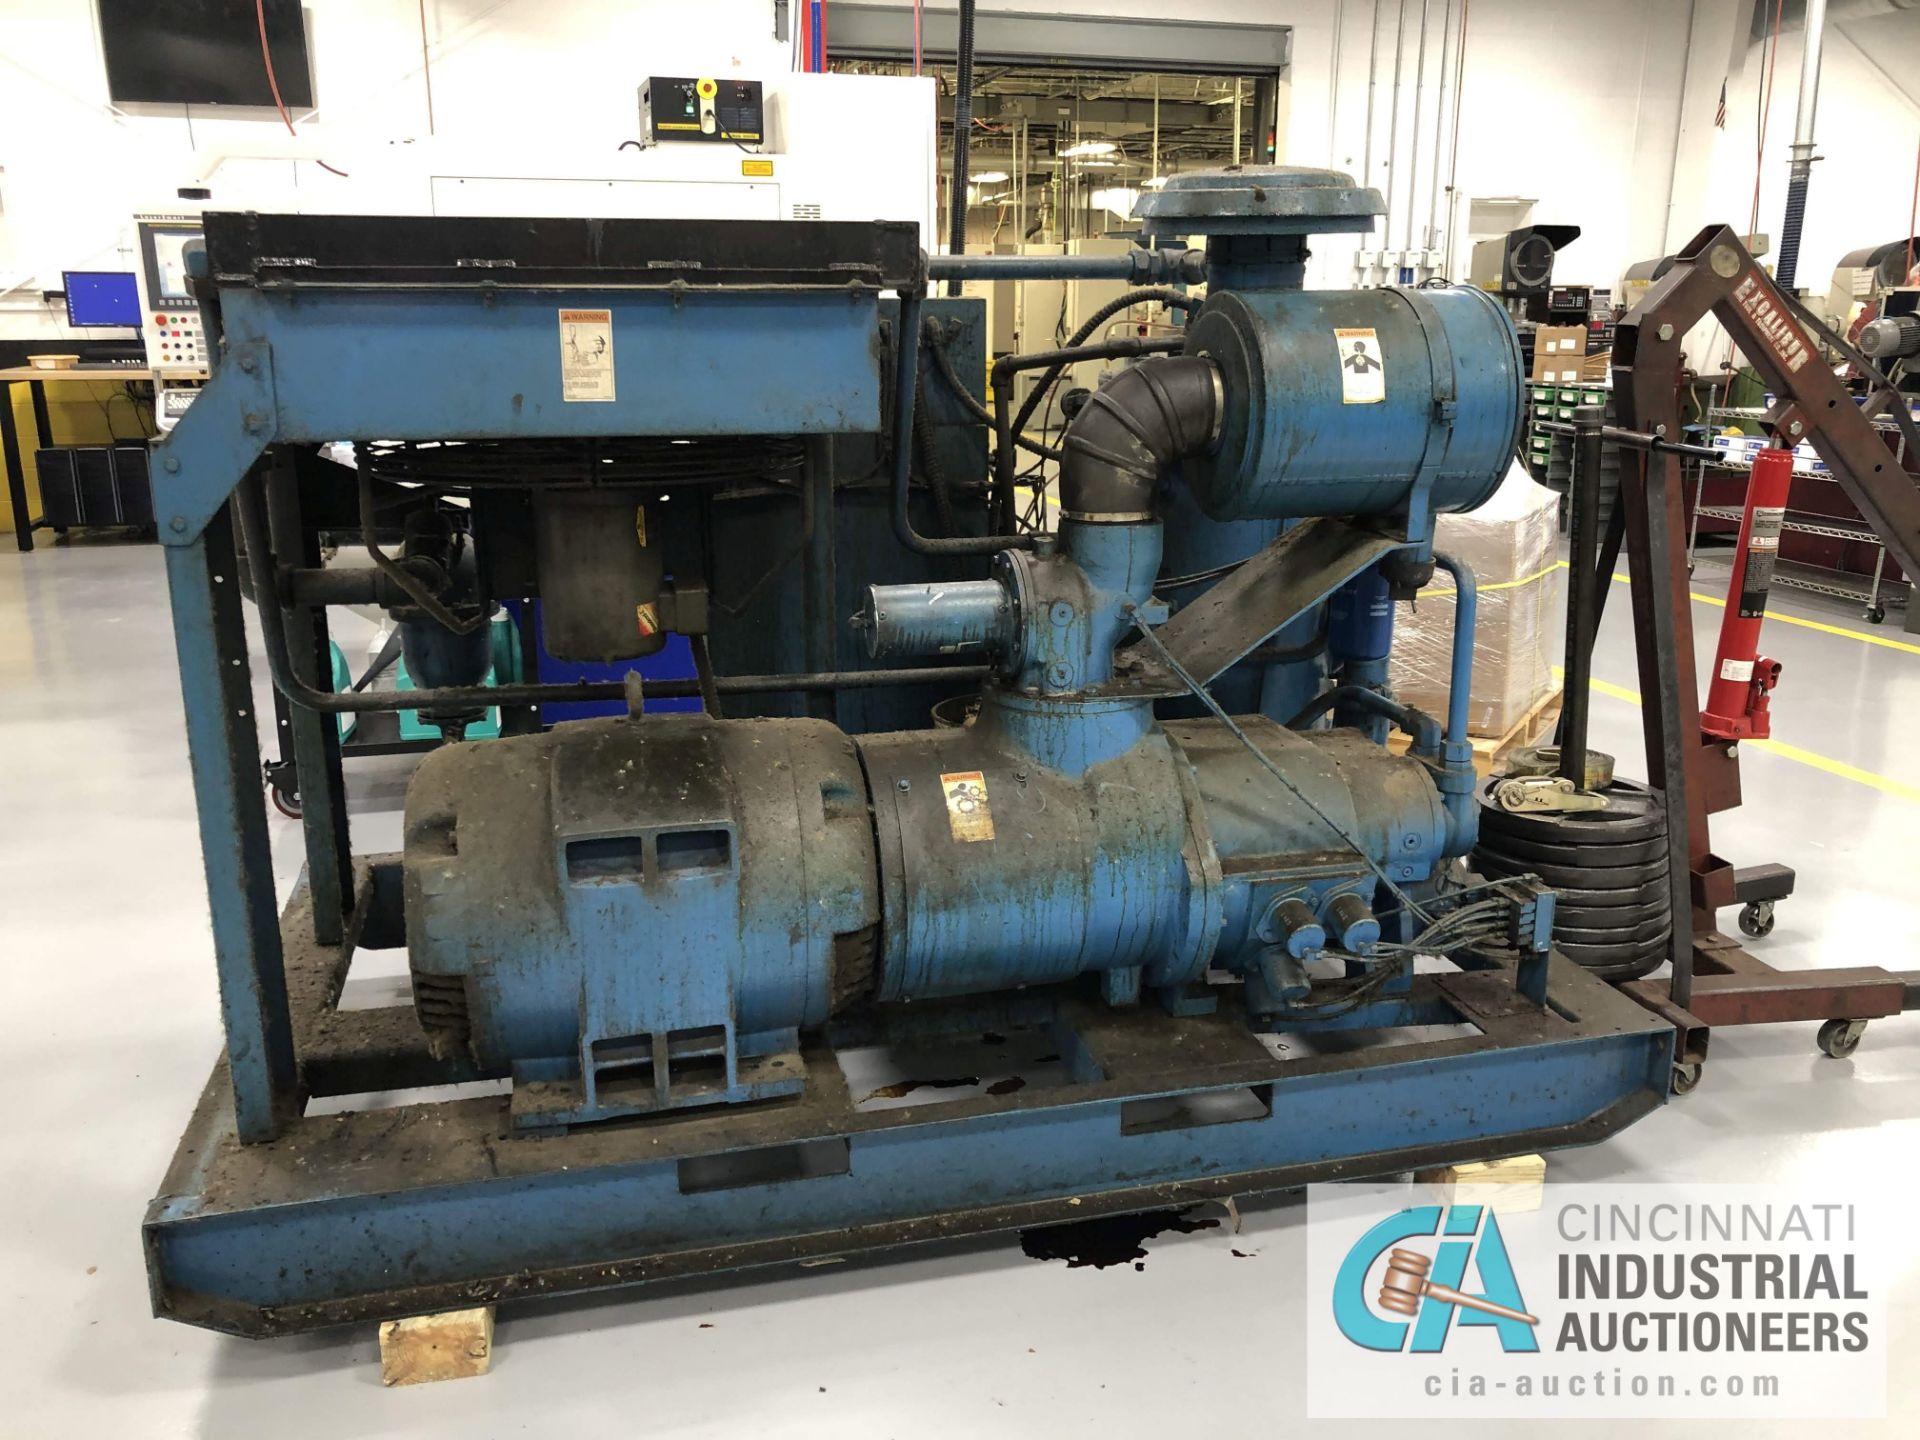 100 HP QUINCY MODEL QSI500-ANA31ED ROTARY SCREW AIR COMPRESSOR - $50.00 Rigging Fee Due to Onsite - Image 3 of 4